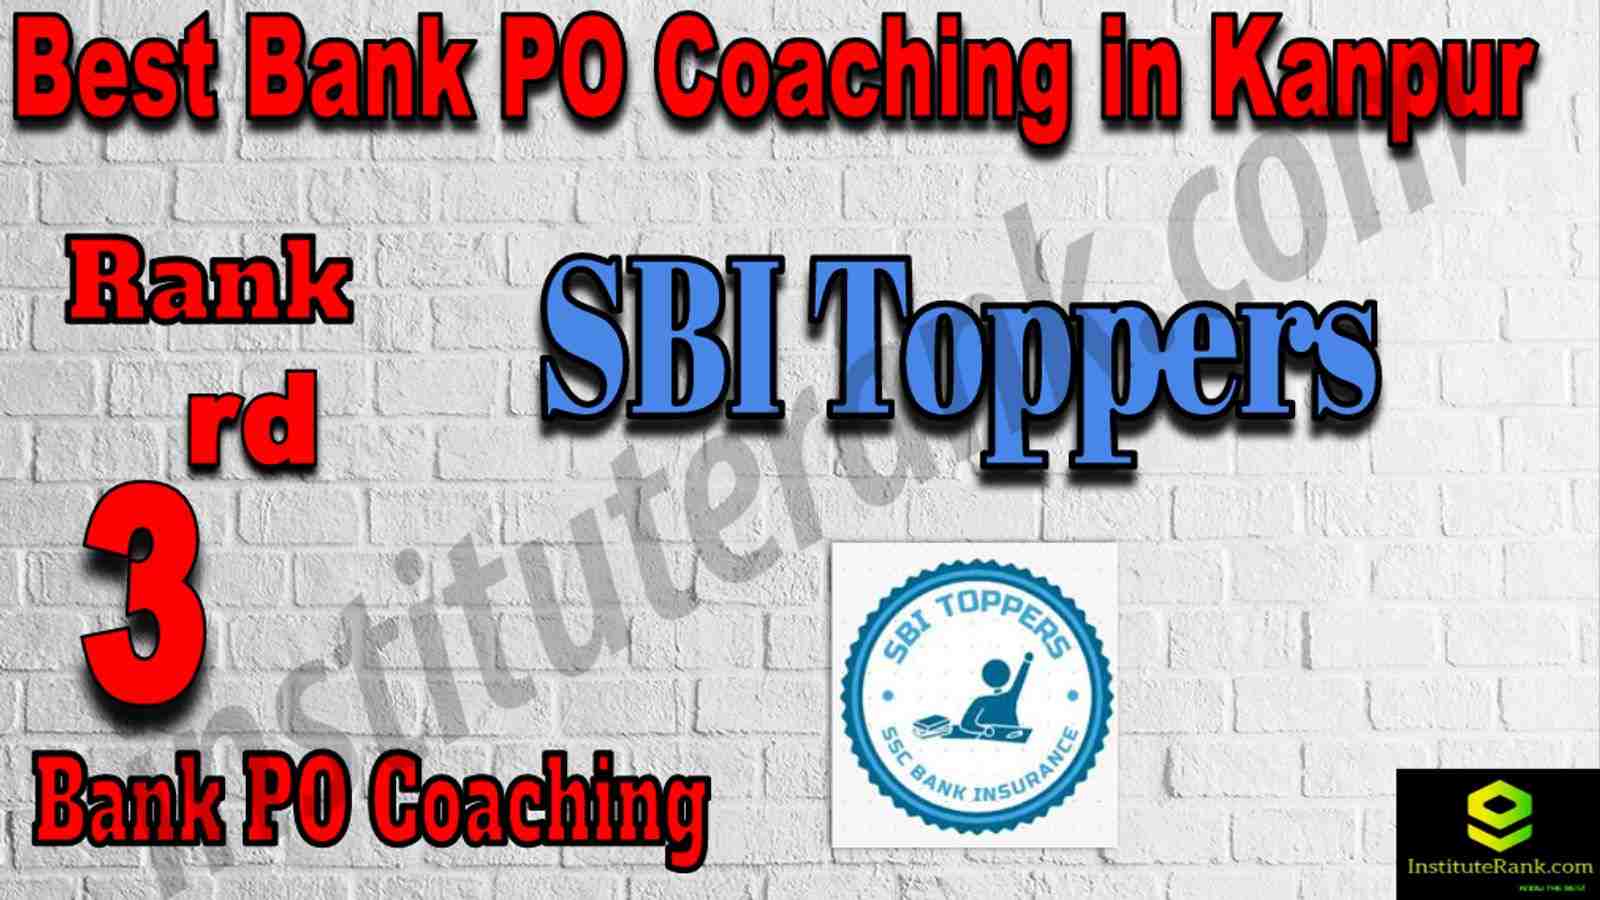 3rd Best Bank PO Coaching in Kanpur